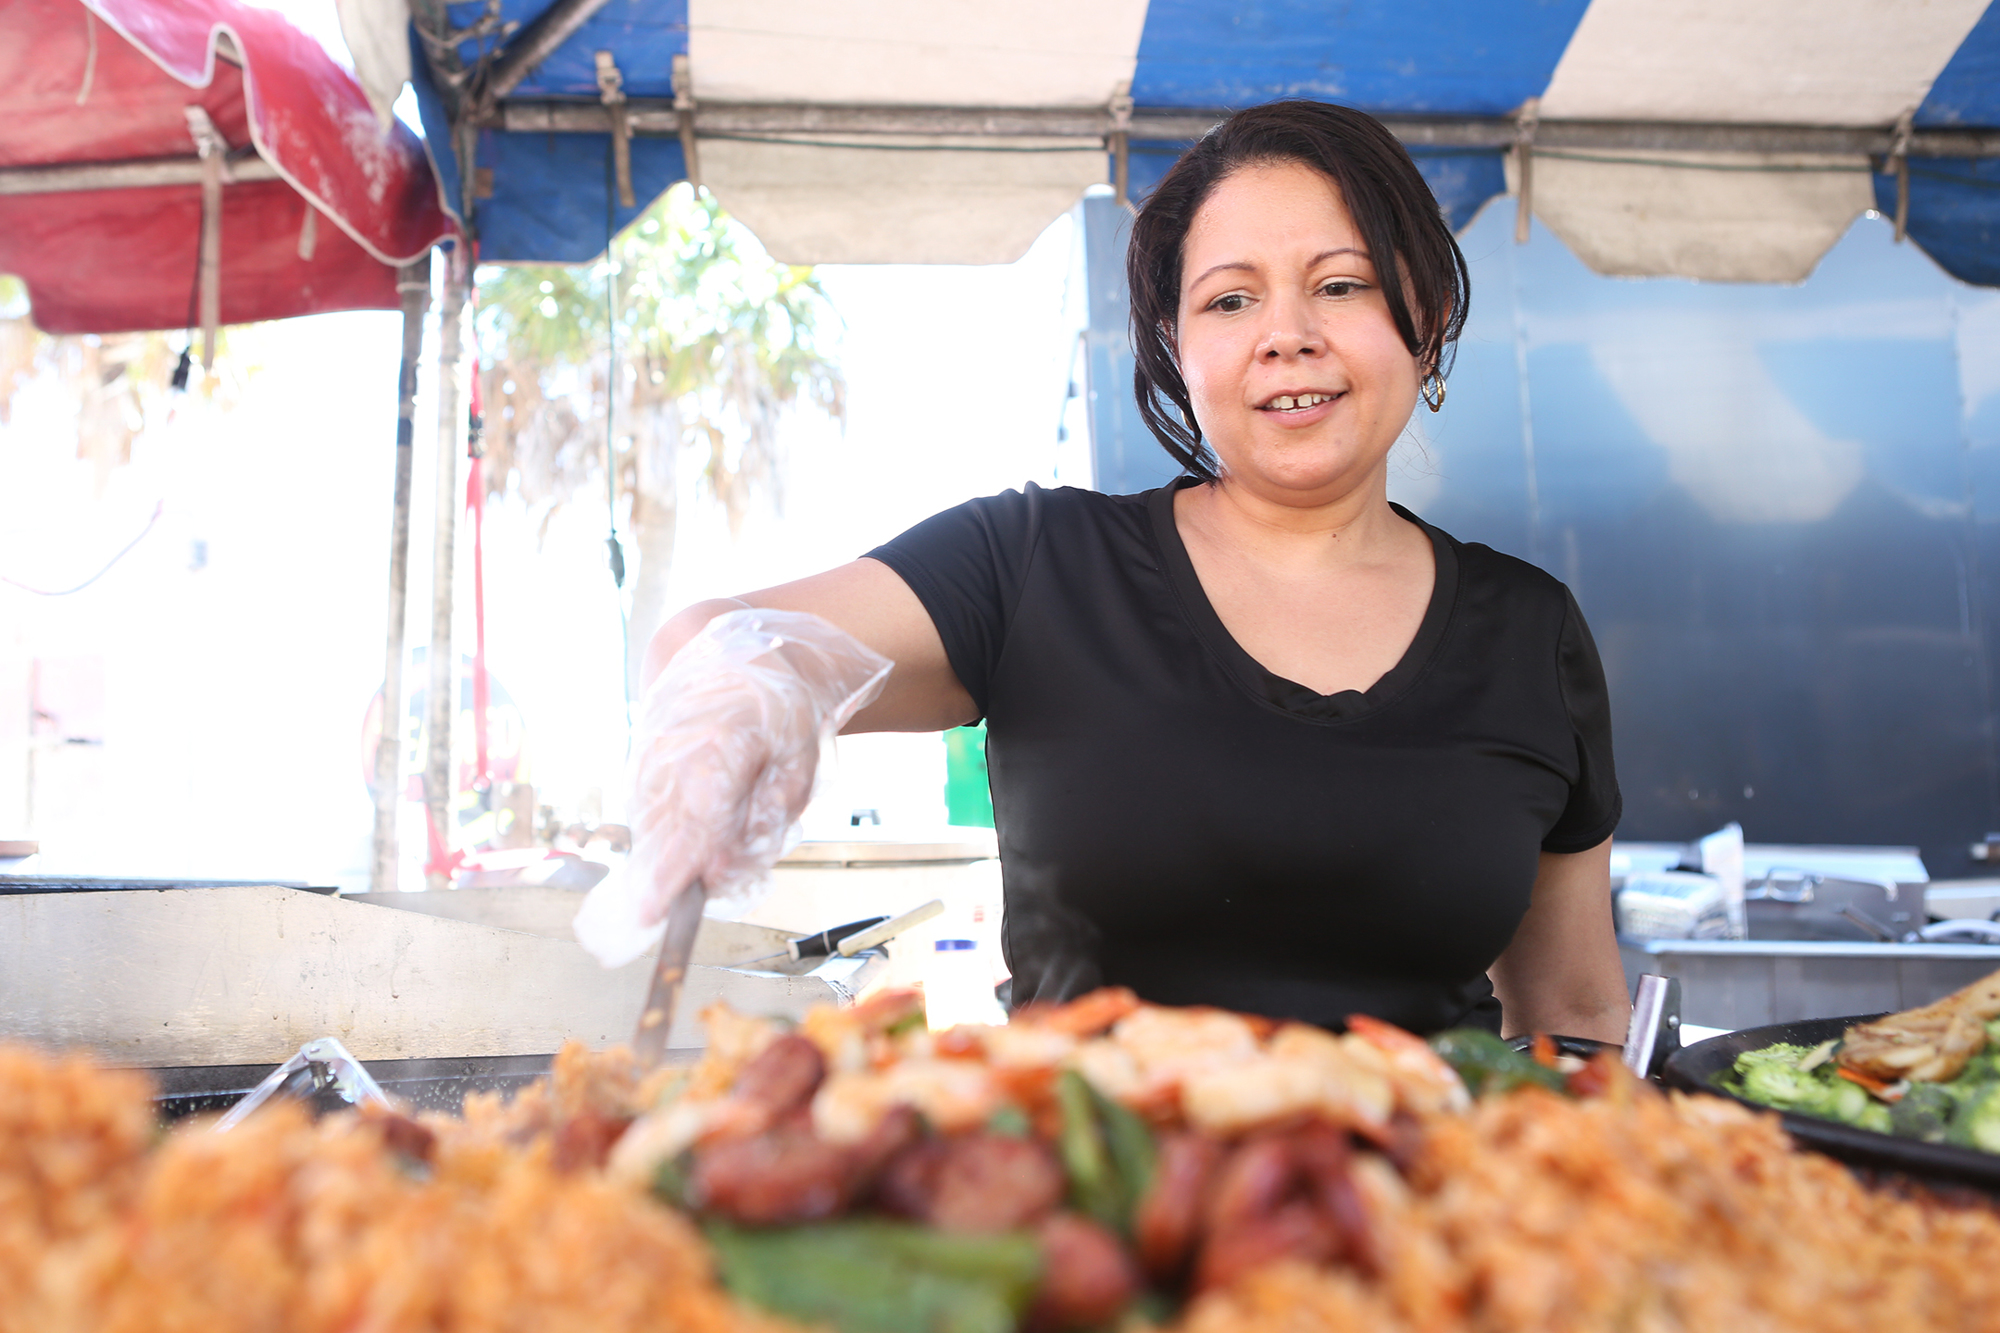 Lilian Prado tends to the seafood at the 2021 Siesta Beach Seafood & Music Festival.